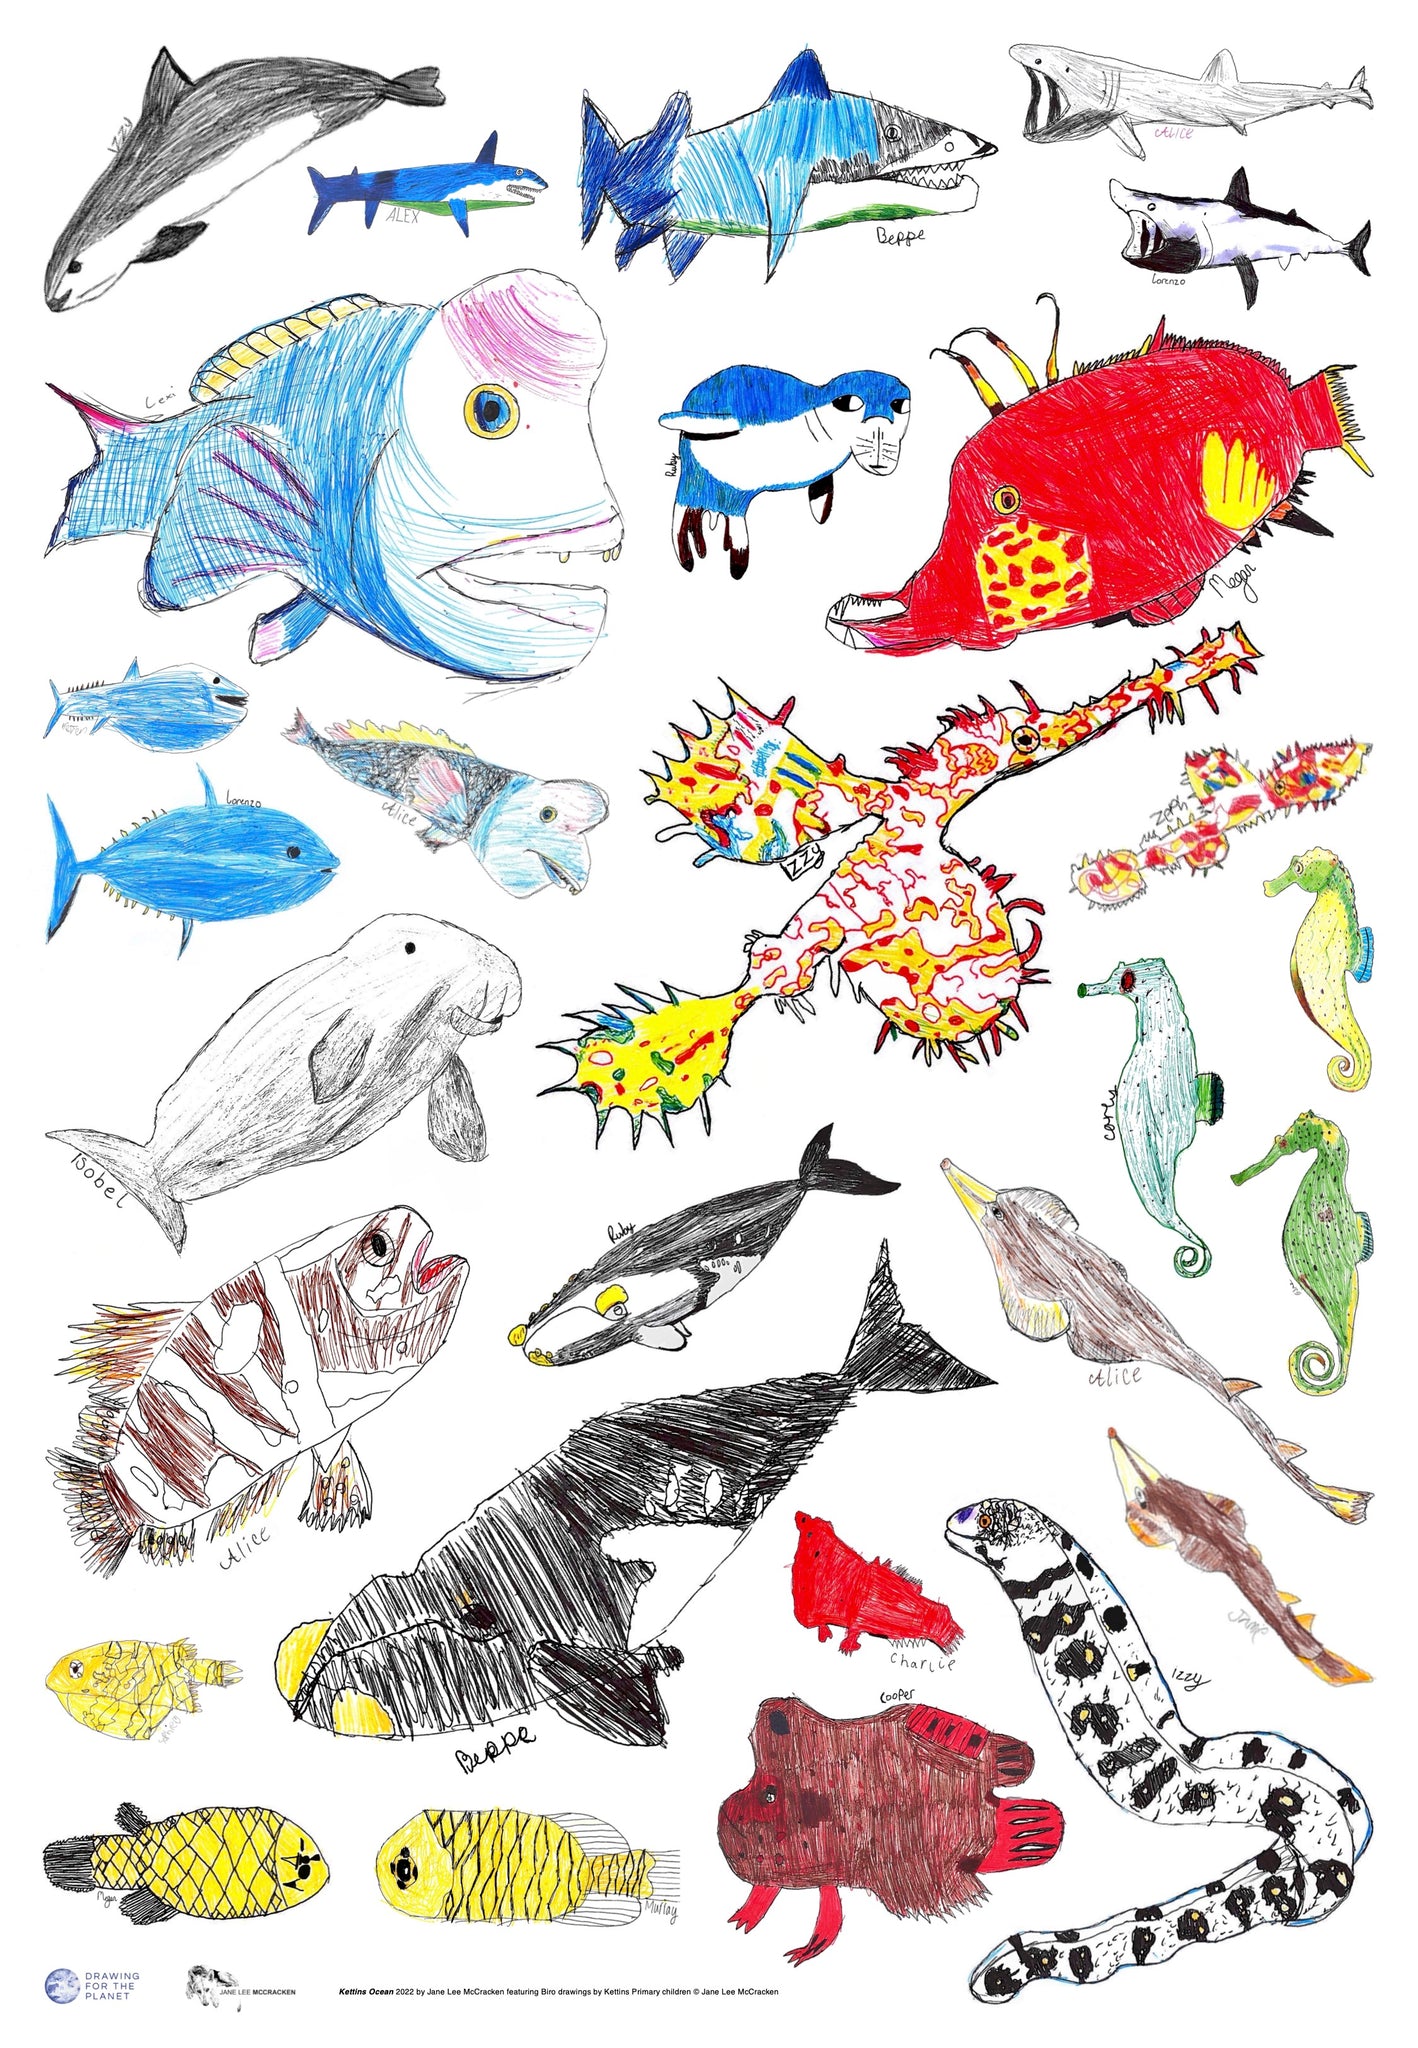 How to Draw Ocean Wonders: Learn to Draw 70 Sea Animals, Seabirds, and Plants for Kids with Step-by-Step Instructions